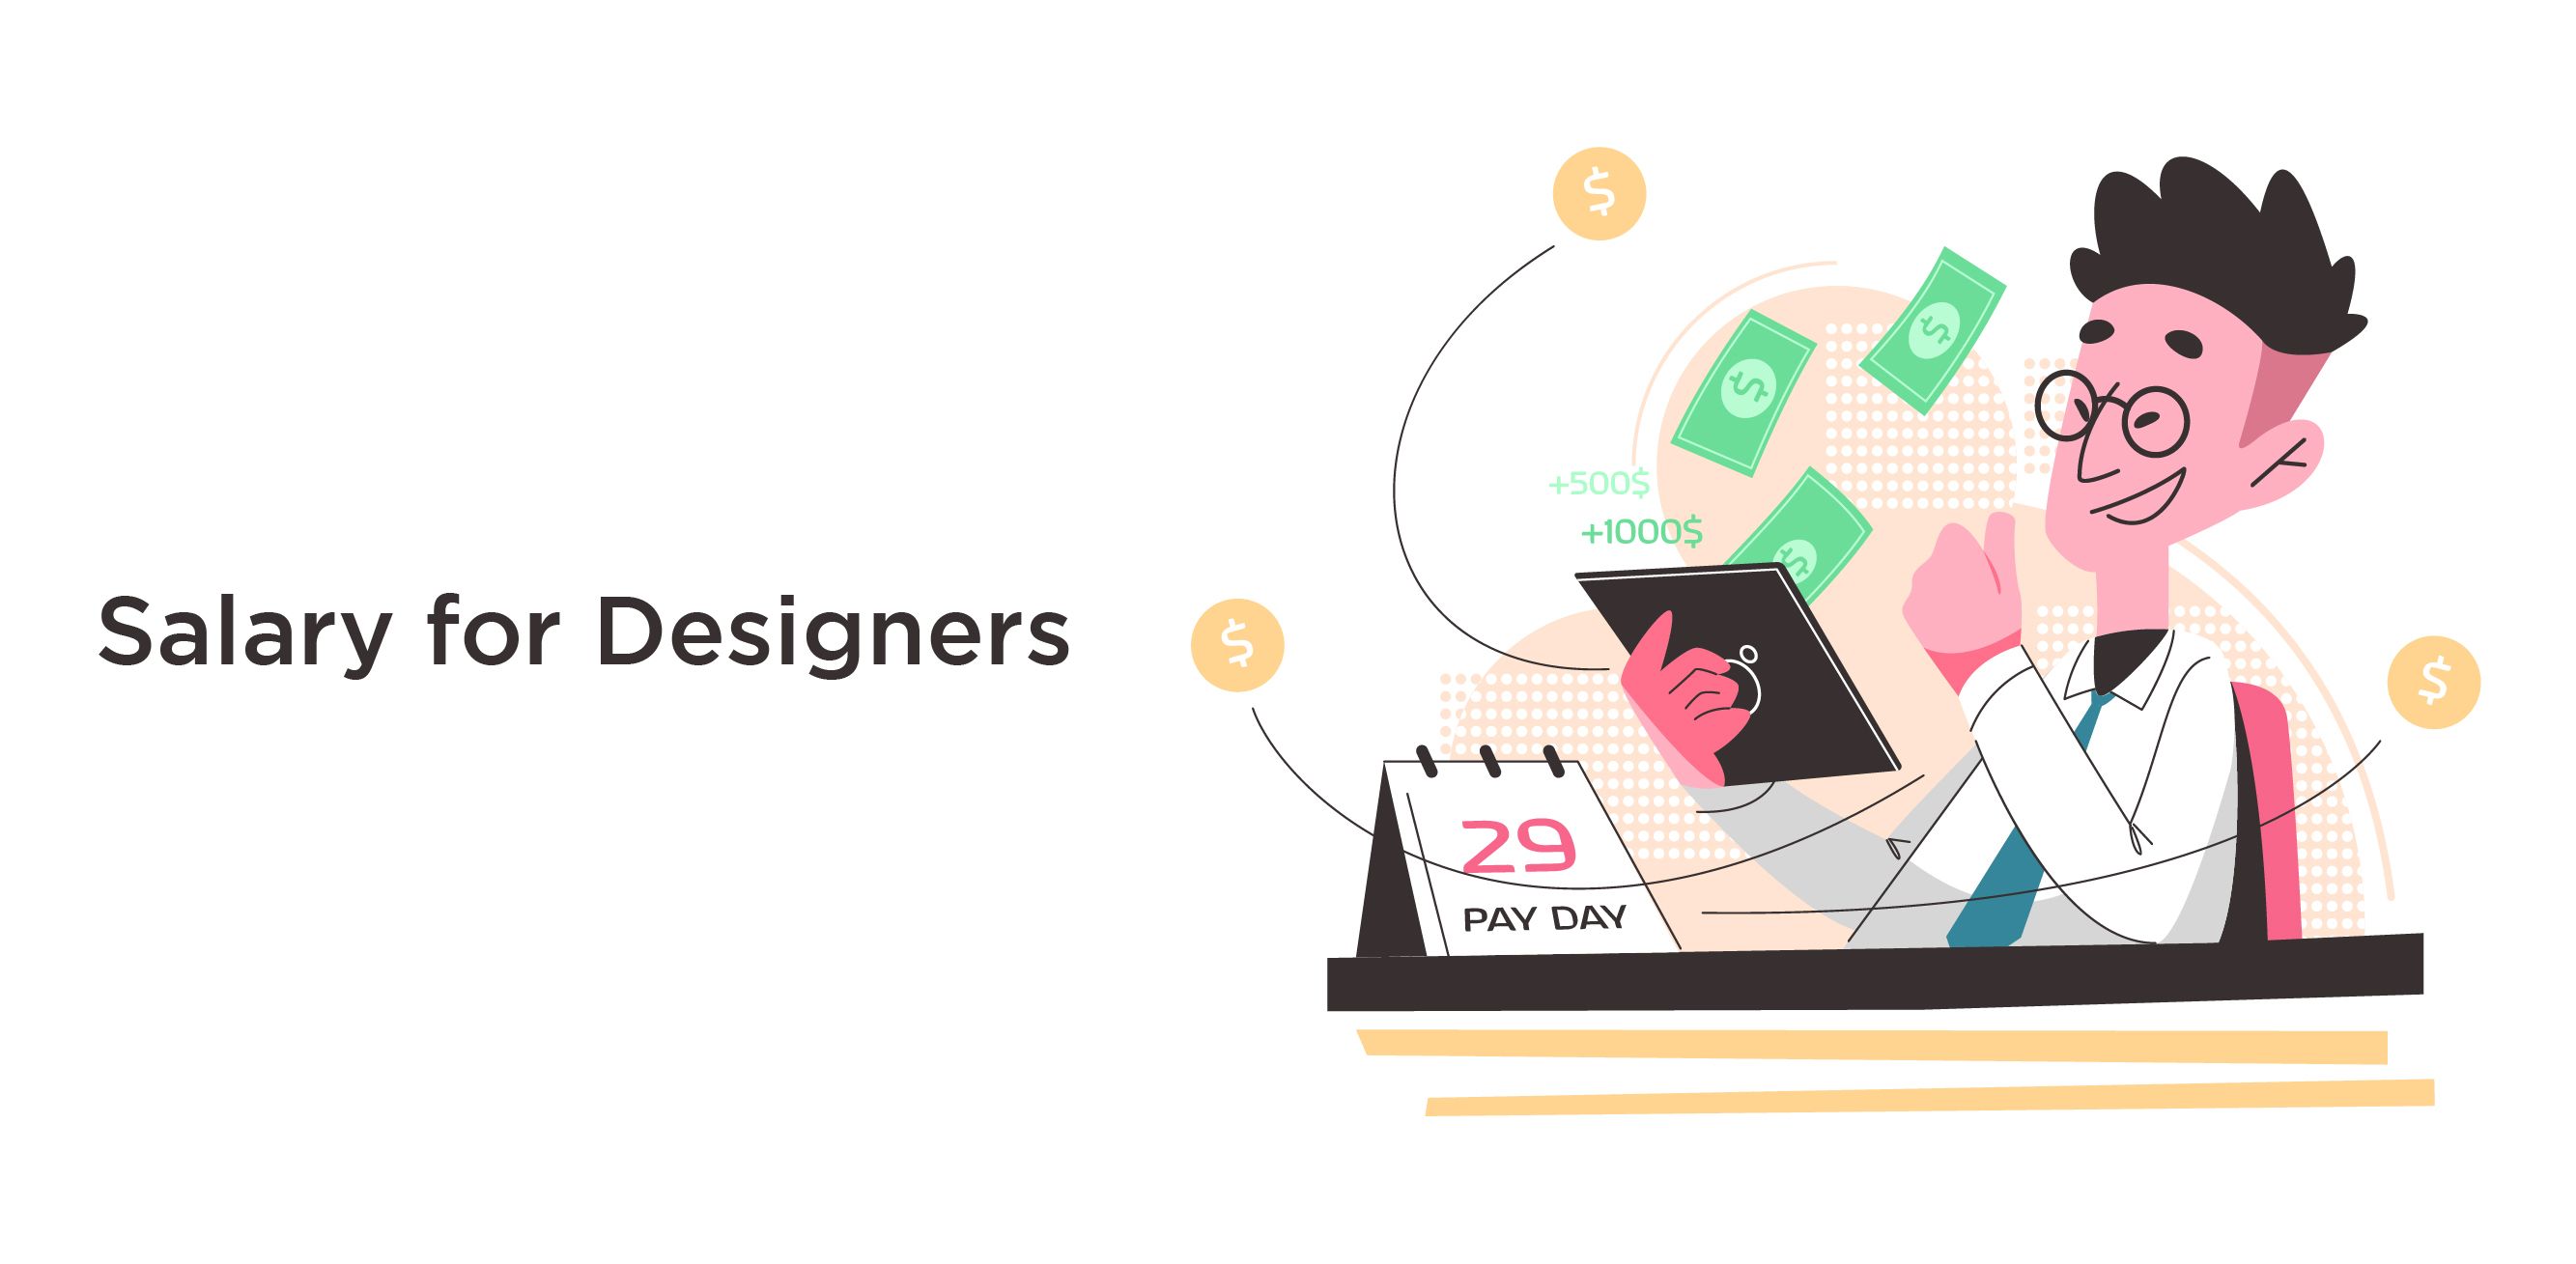 Salary for Designers